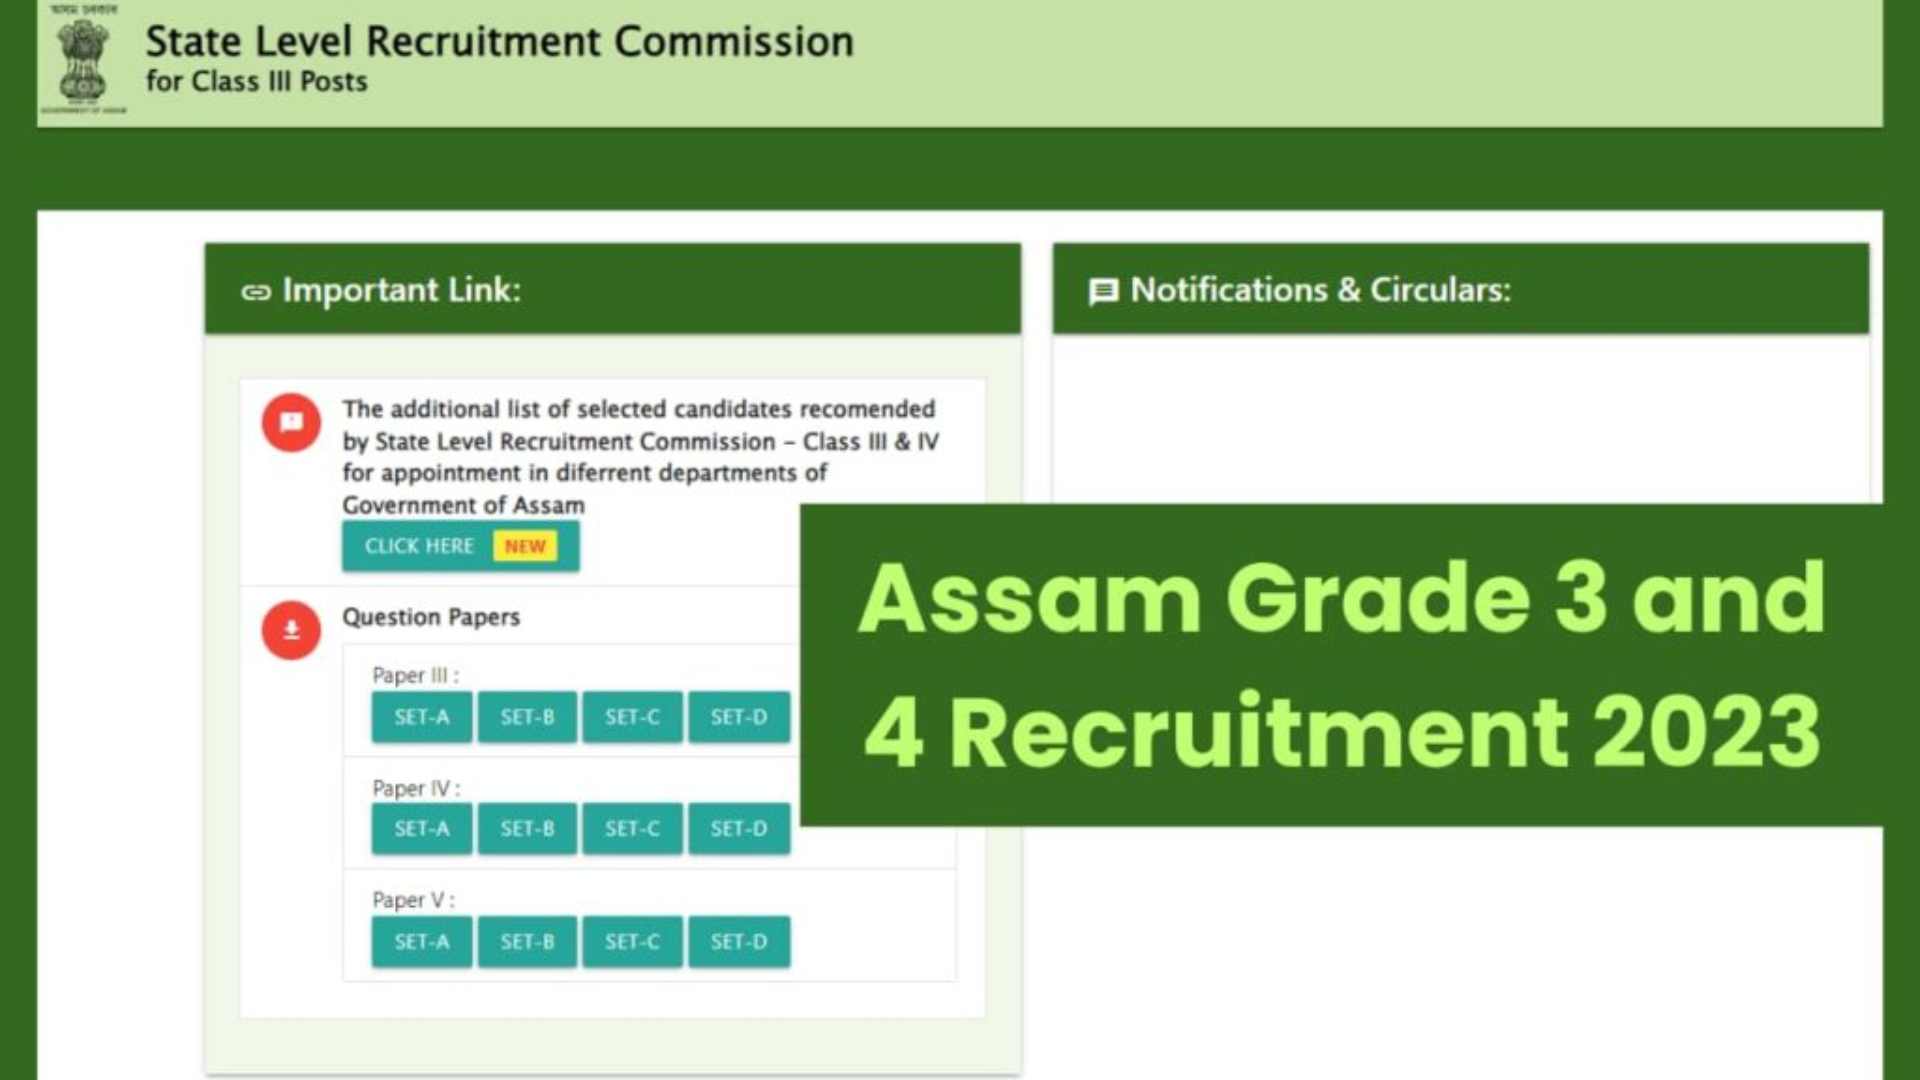 Assam Grade 3 and 4 Recruitment 2023 [12600 Post] Notification and Online Form